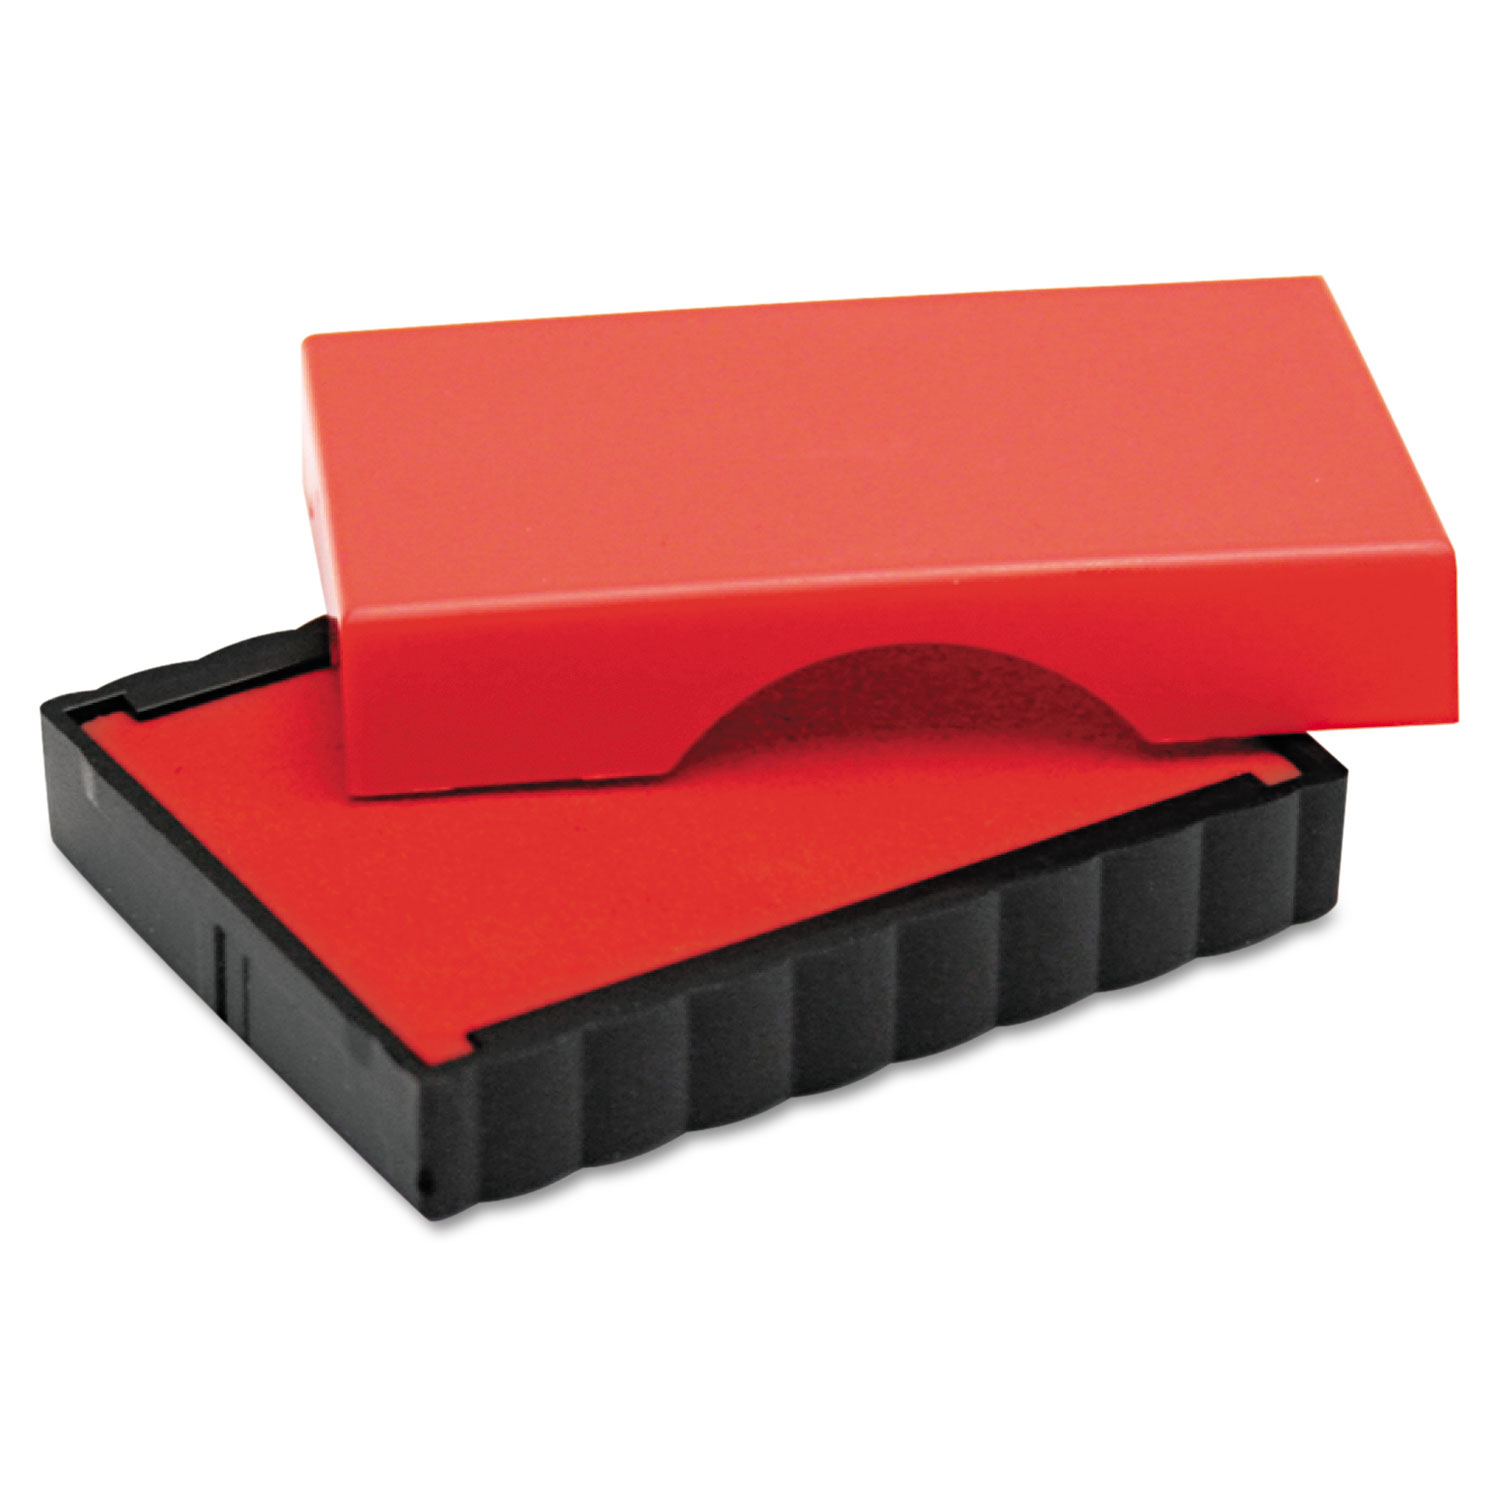  Identity Group P4911RE Trodat T4911 Message Replacement Pad, 9/16 x 1 1/2, Red (USSP4911RE) 